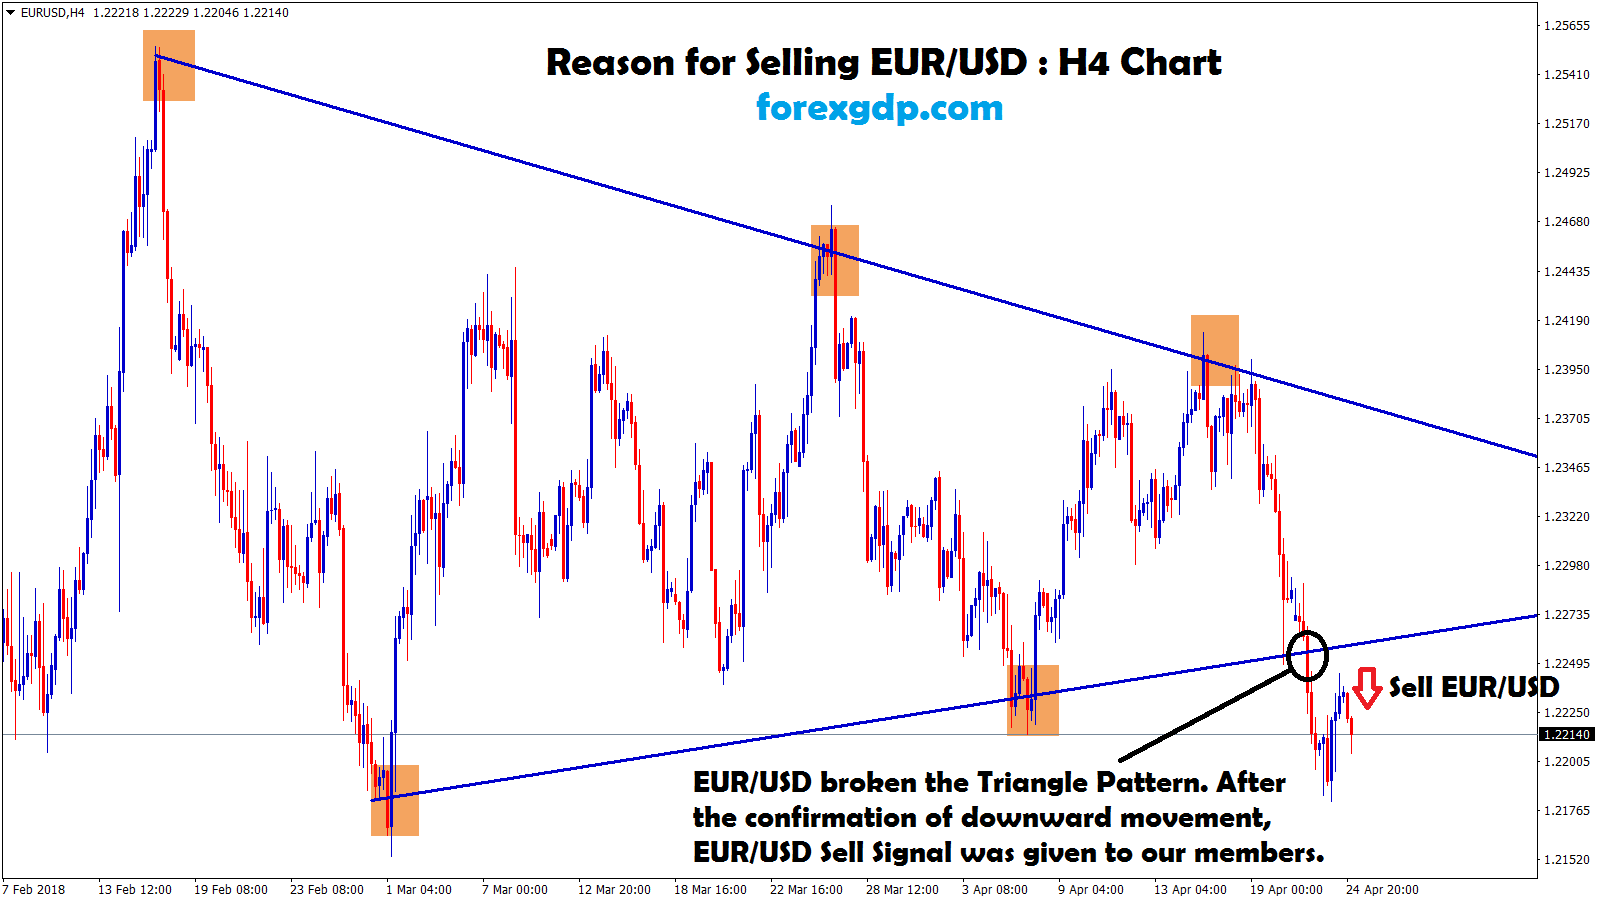 after breakout sell signal given in eur usd